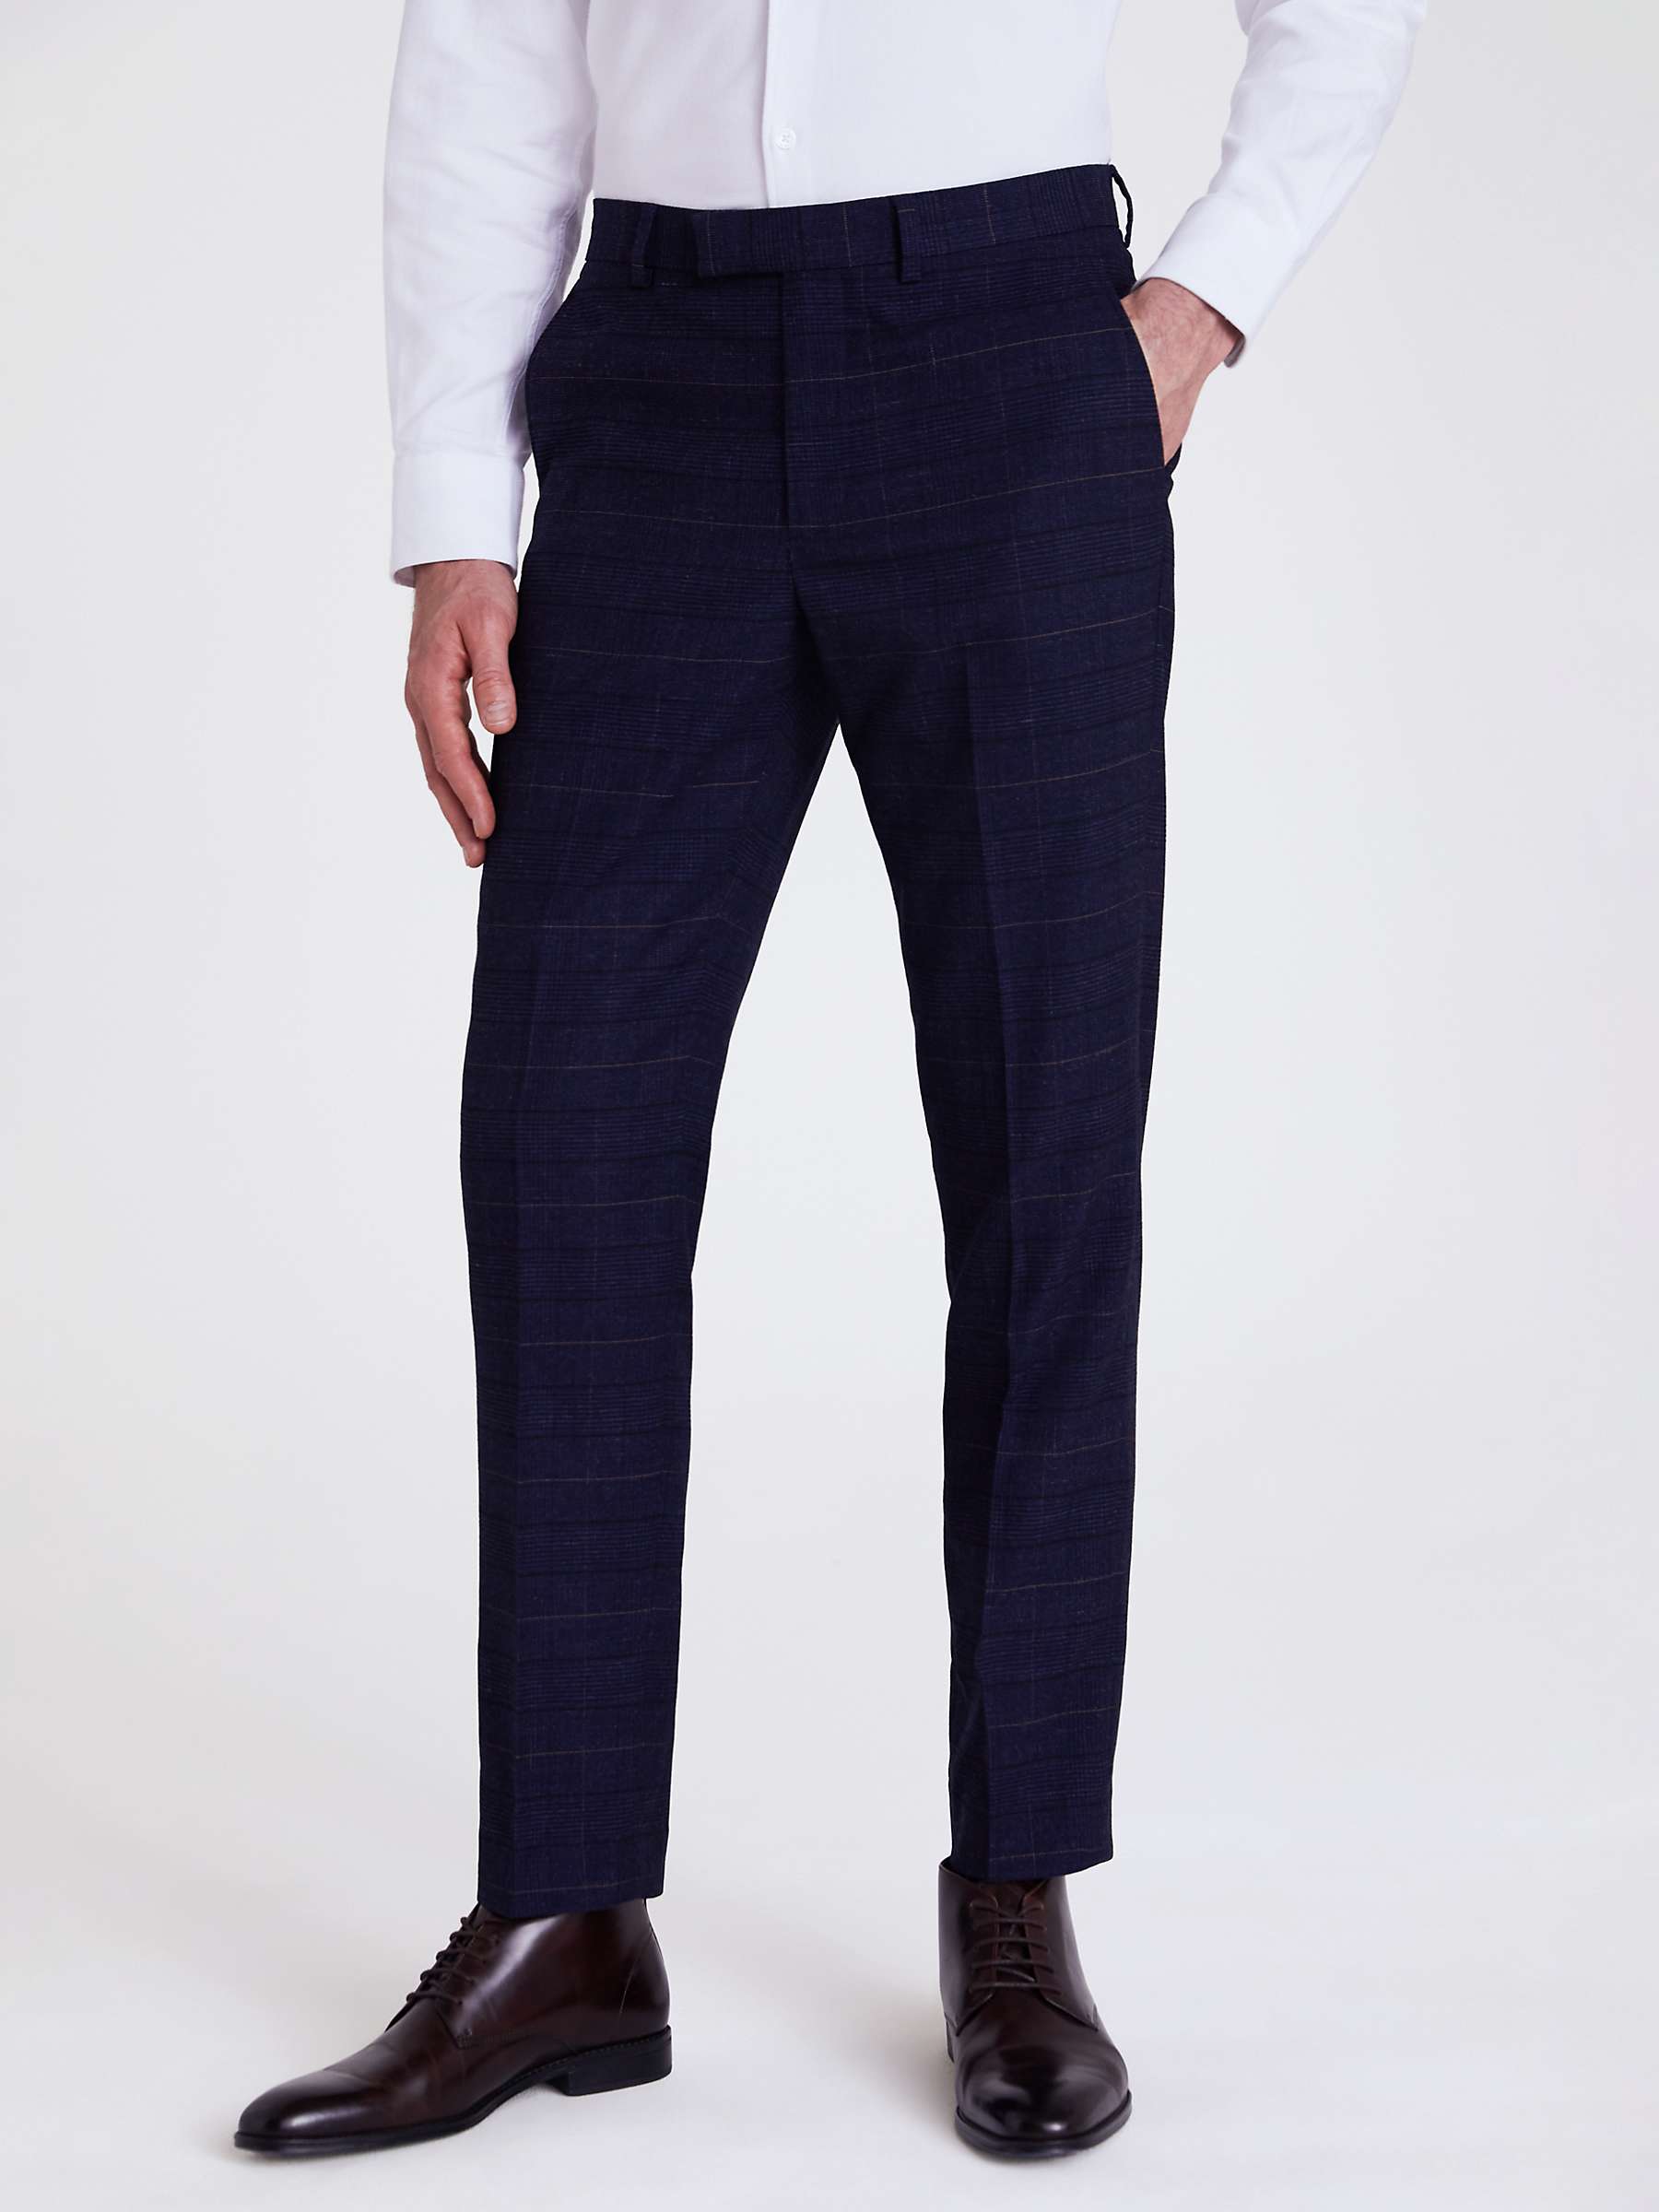 Buy Moss Slim Check Suit Trousers, Navy/Black Online at johnlewis.com